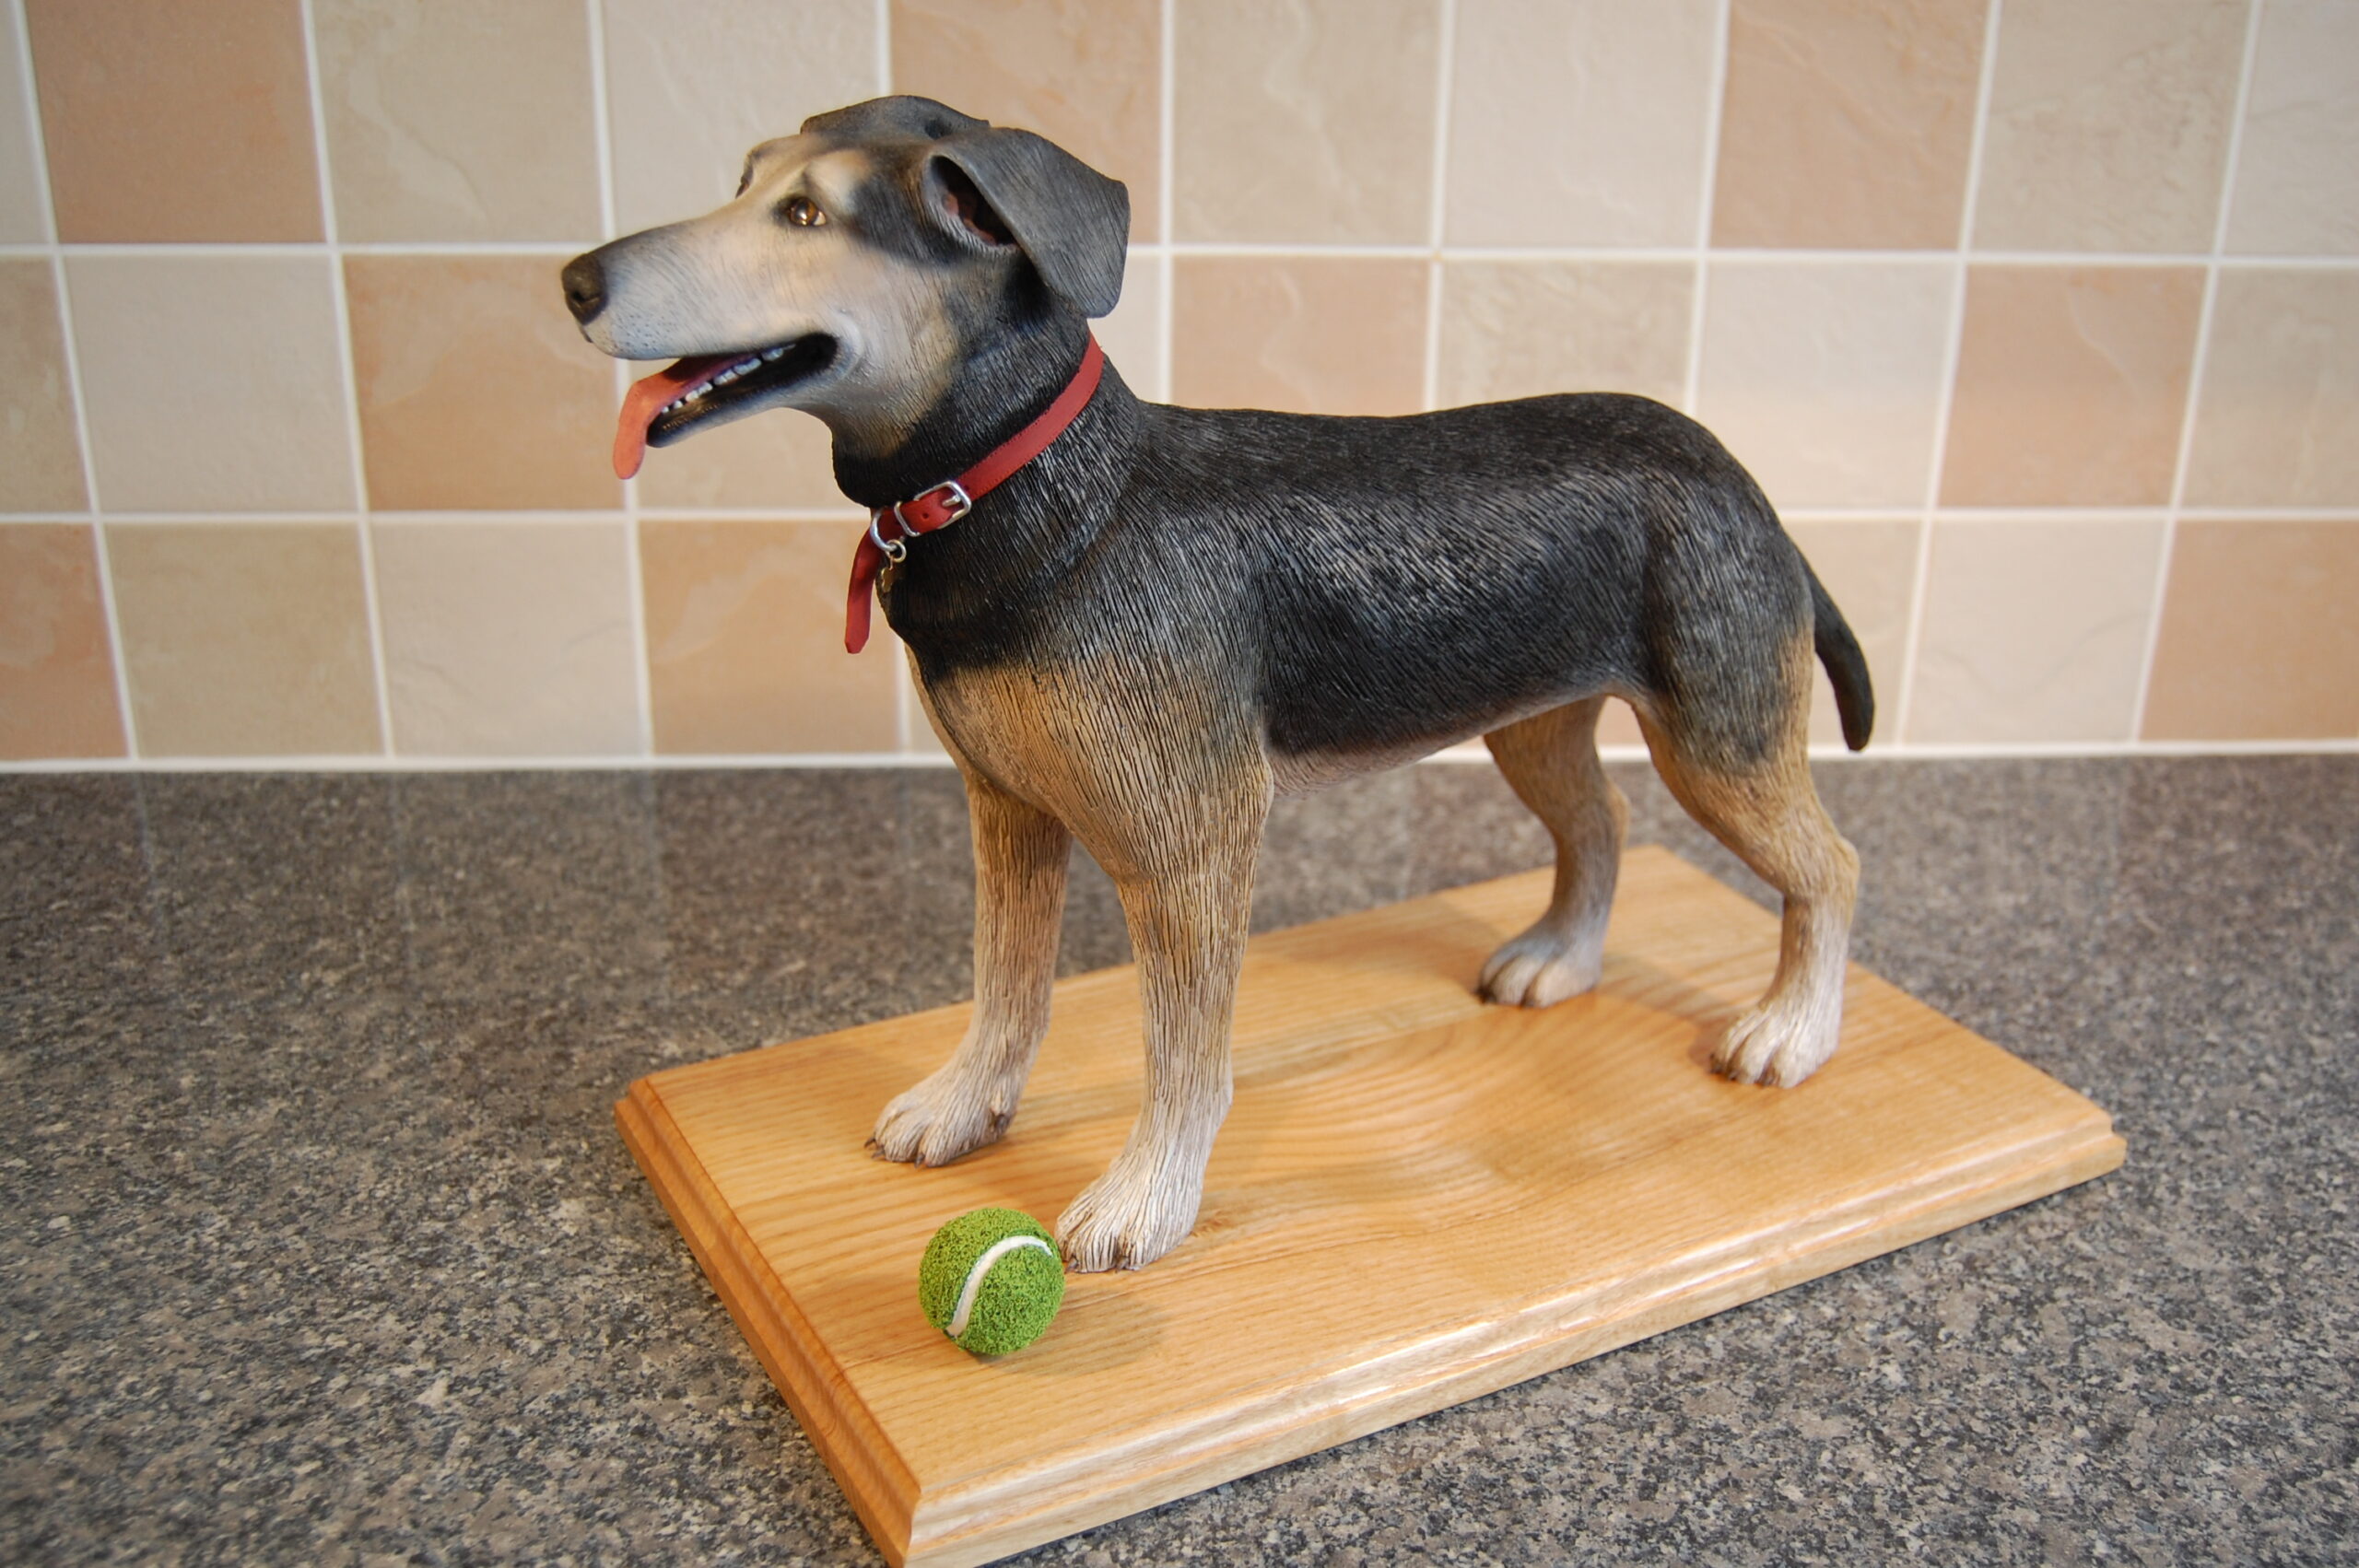 Sculpture of a black, white and tan dog, standing with a tennis ball at his front feet.